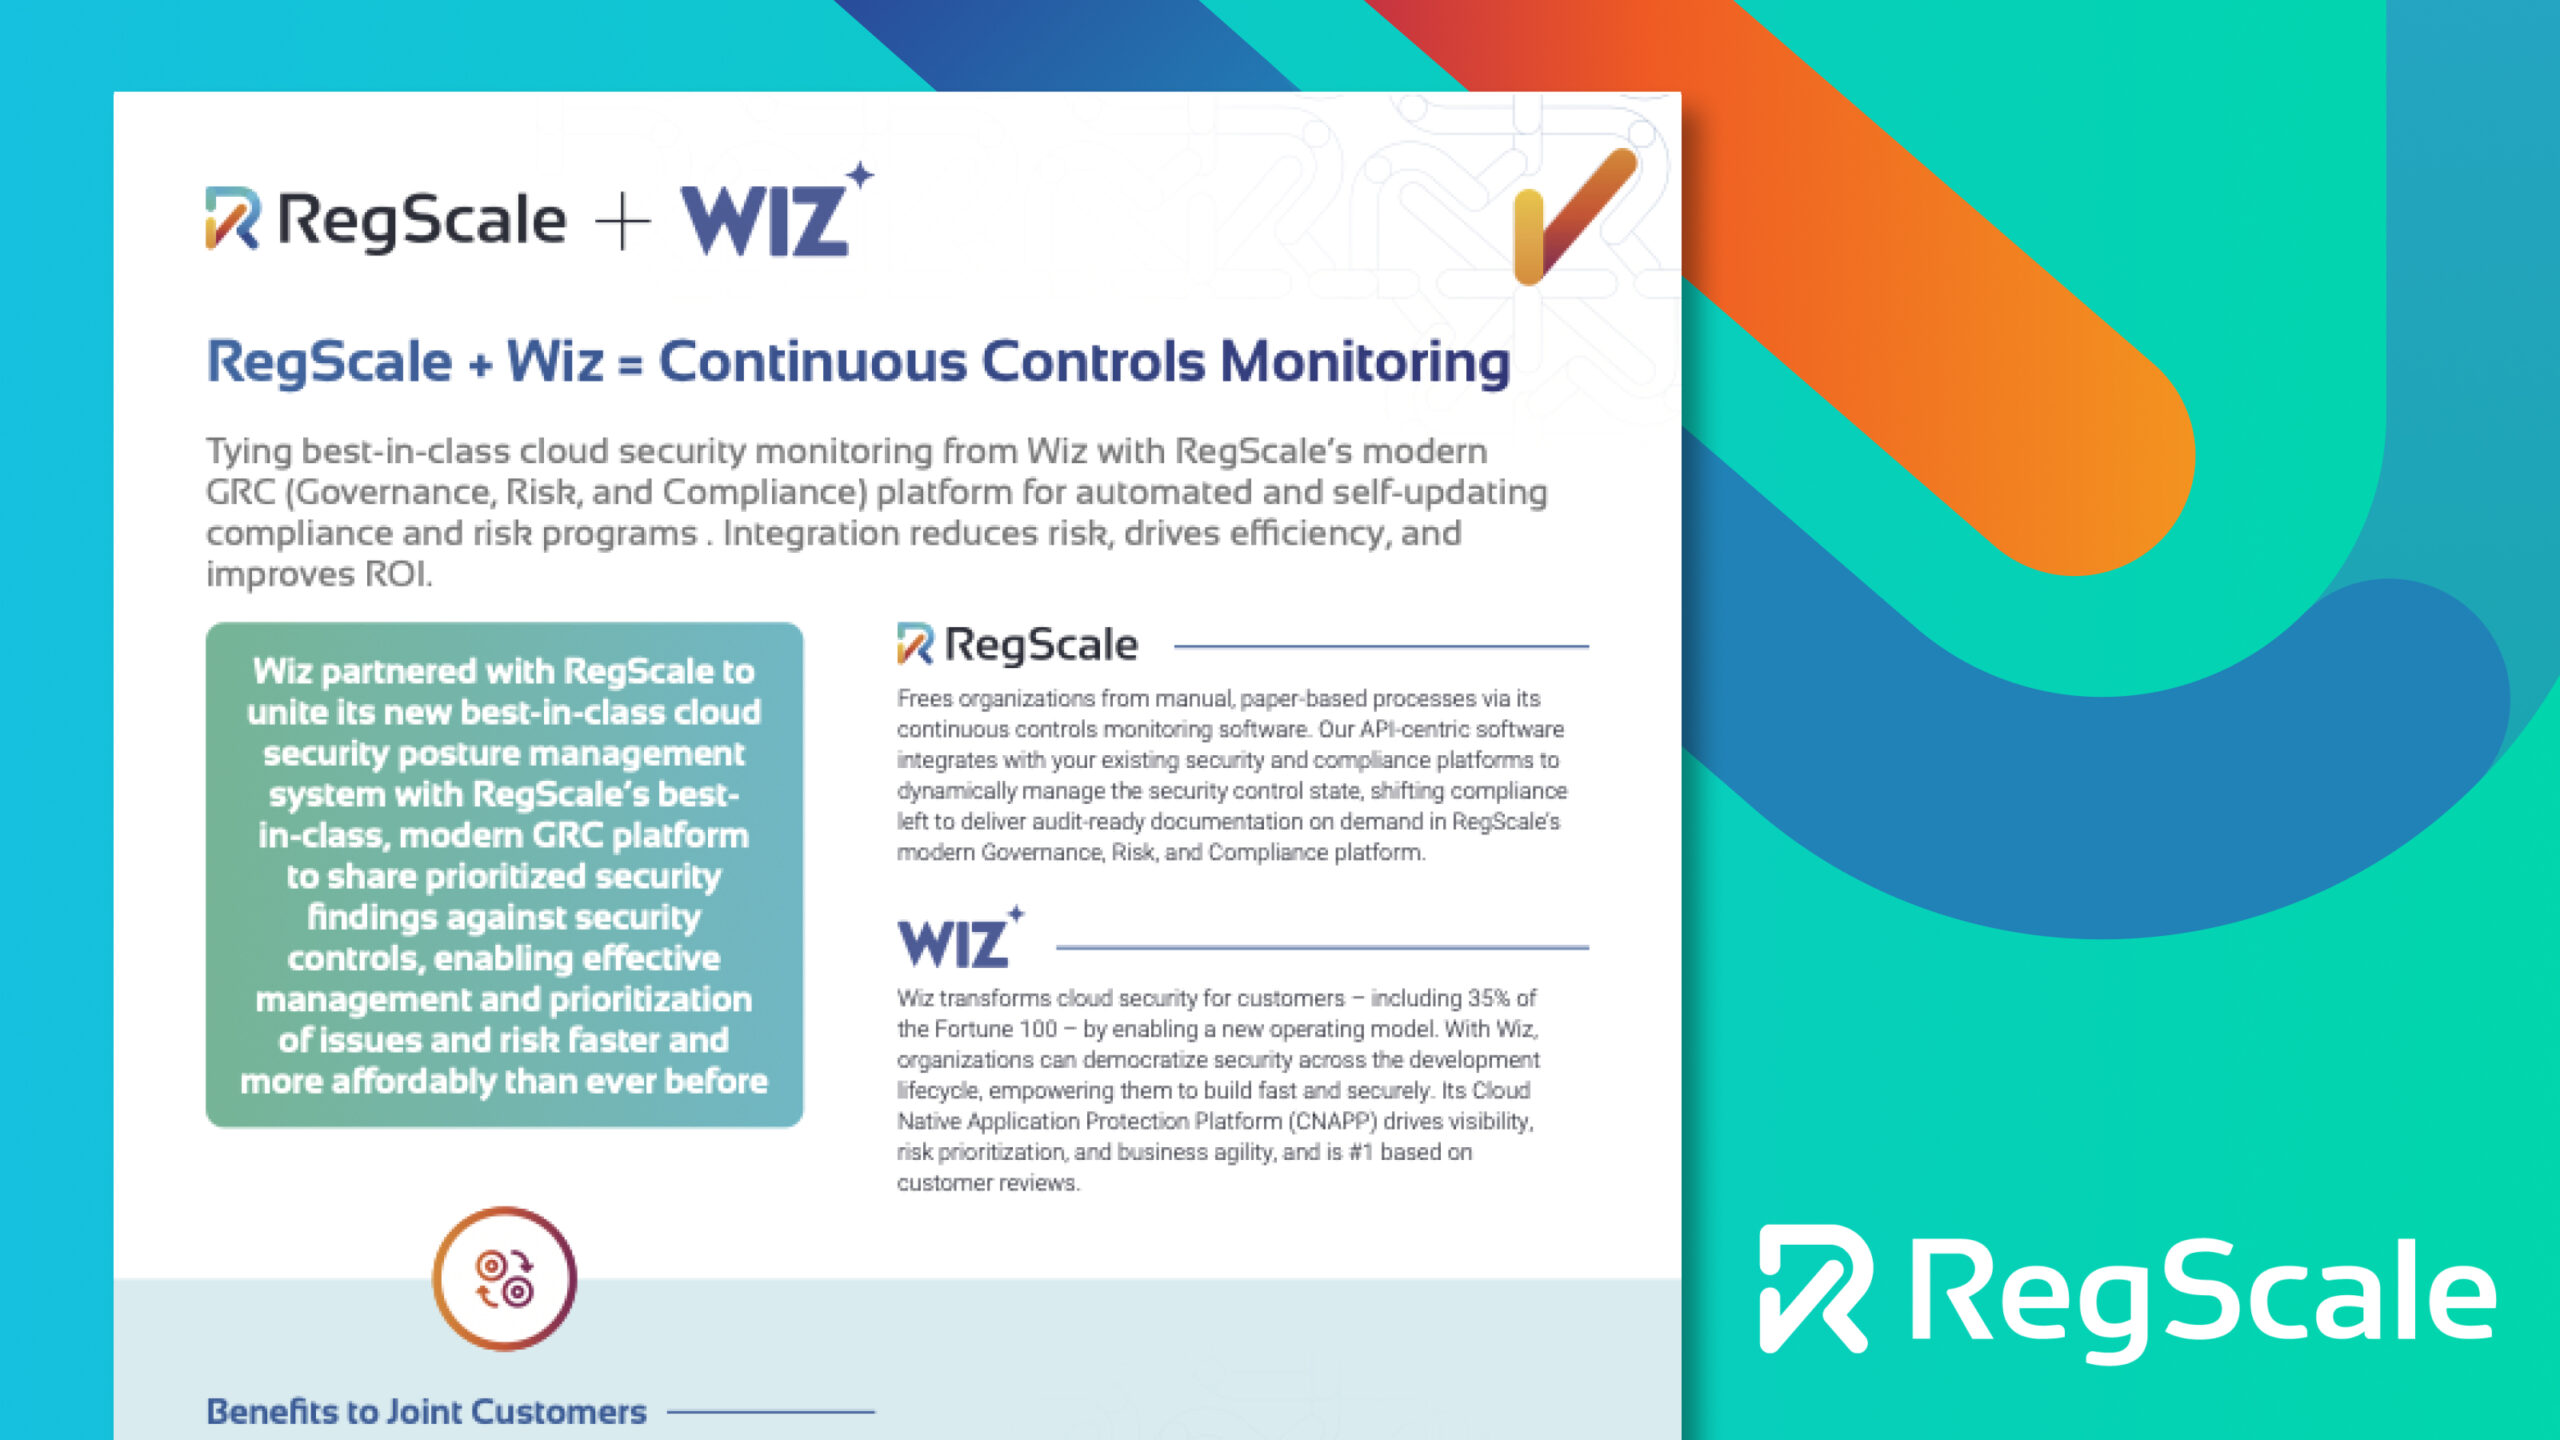 Continuous controls monitoring with RegScale and Wiz